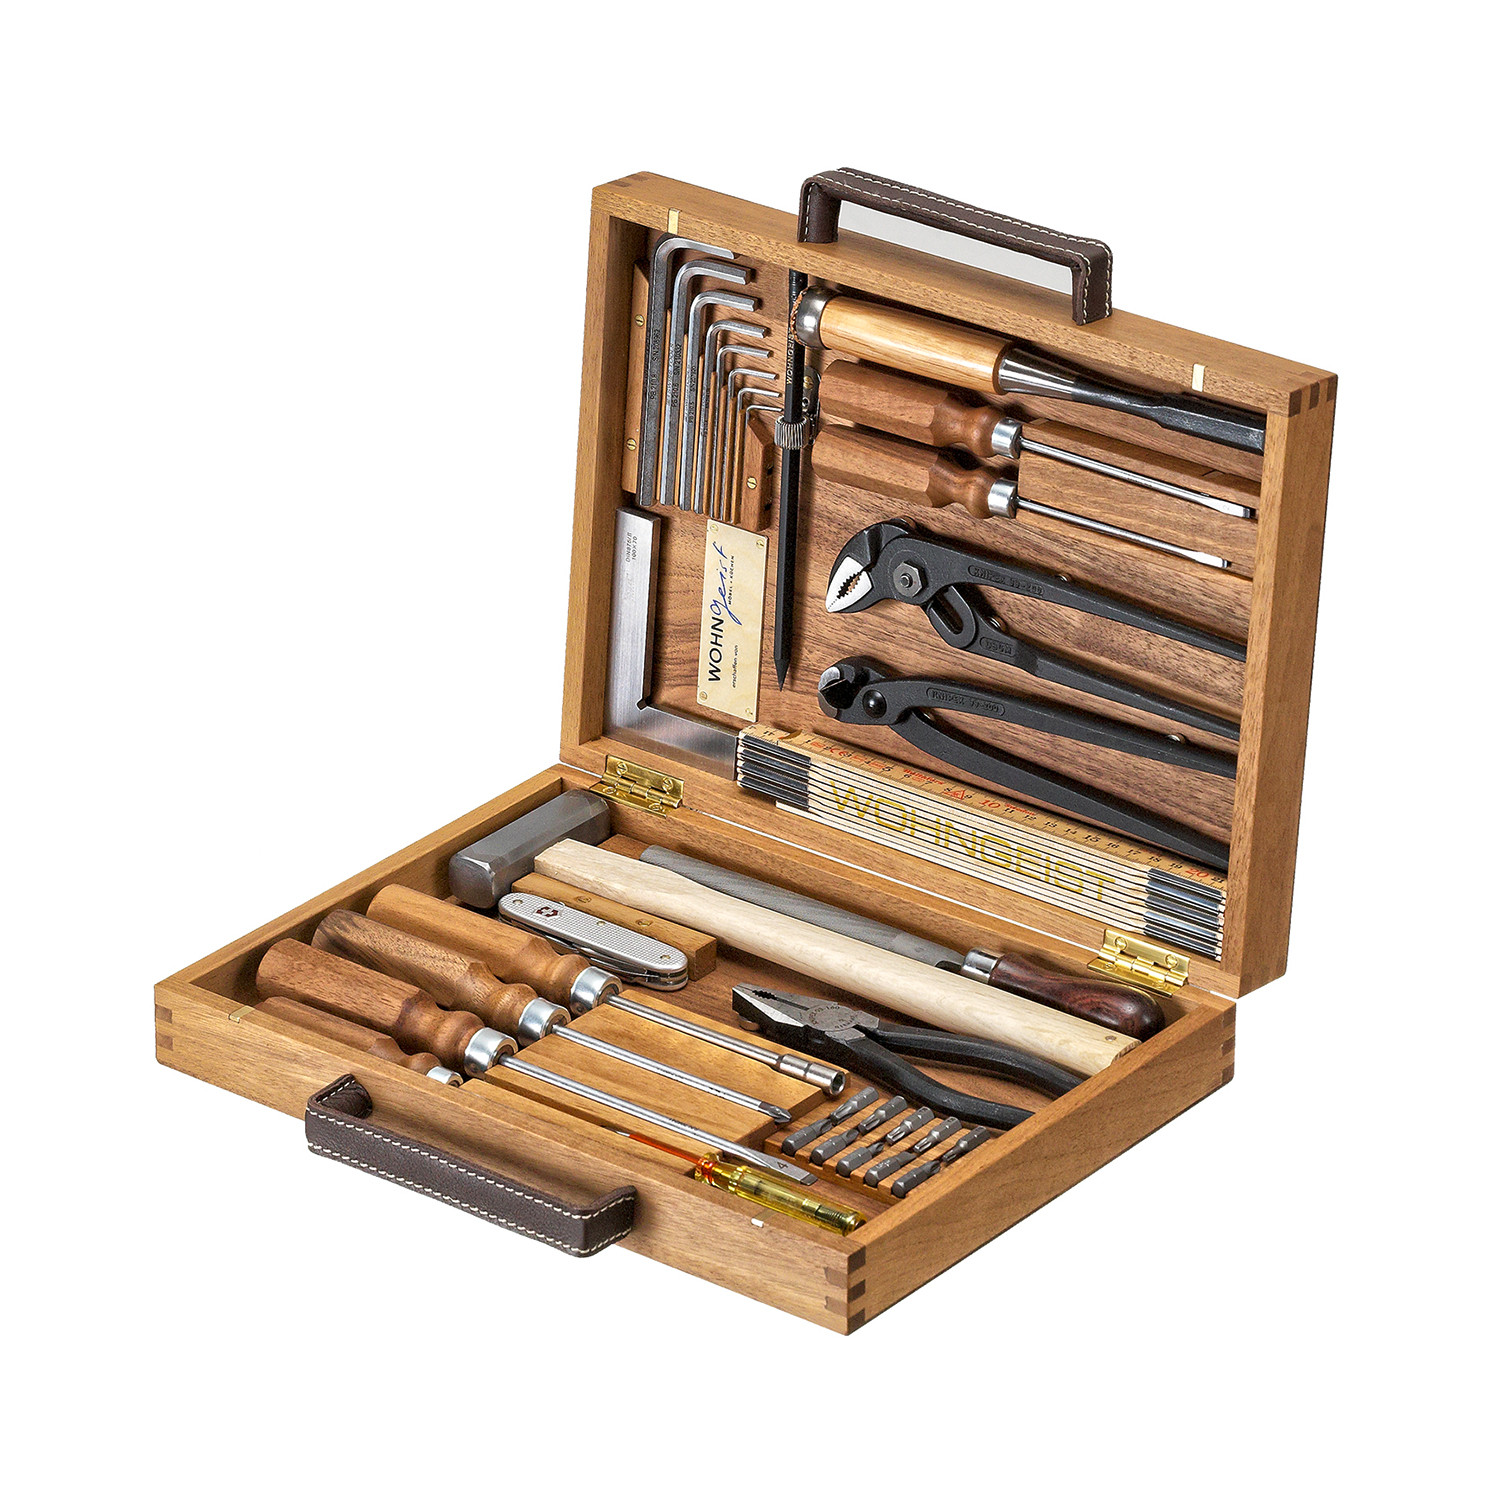 Swiss Tool Case - Wohngeist Wood and Luxury - Touch of Modern